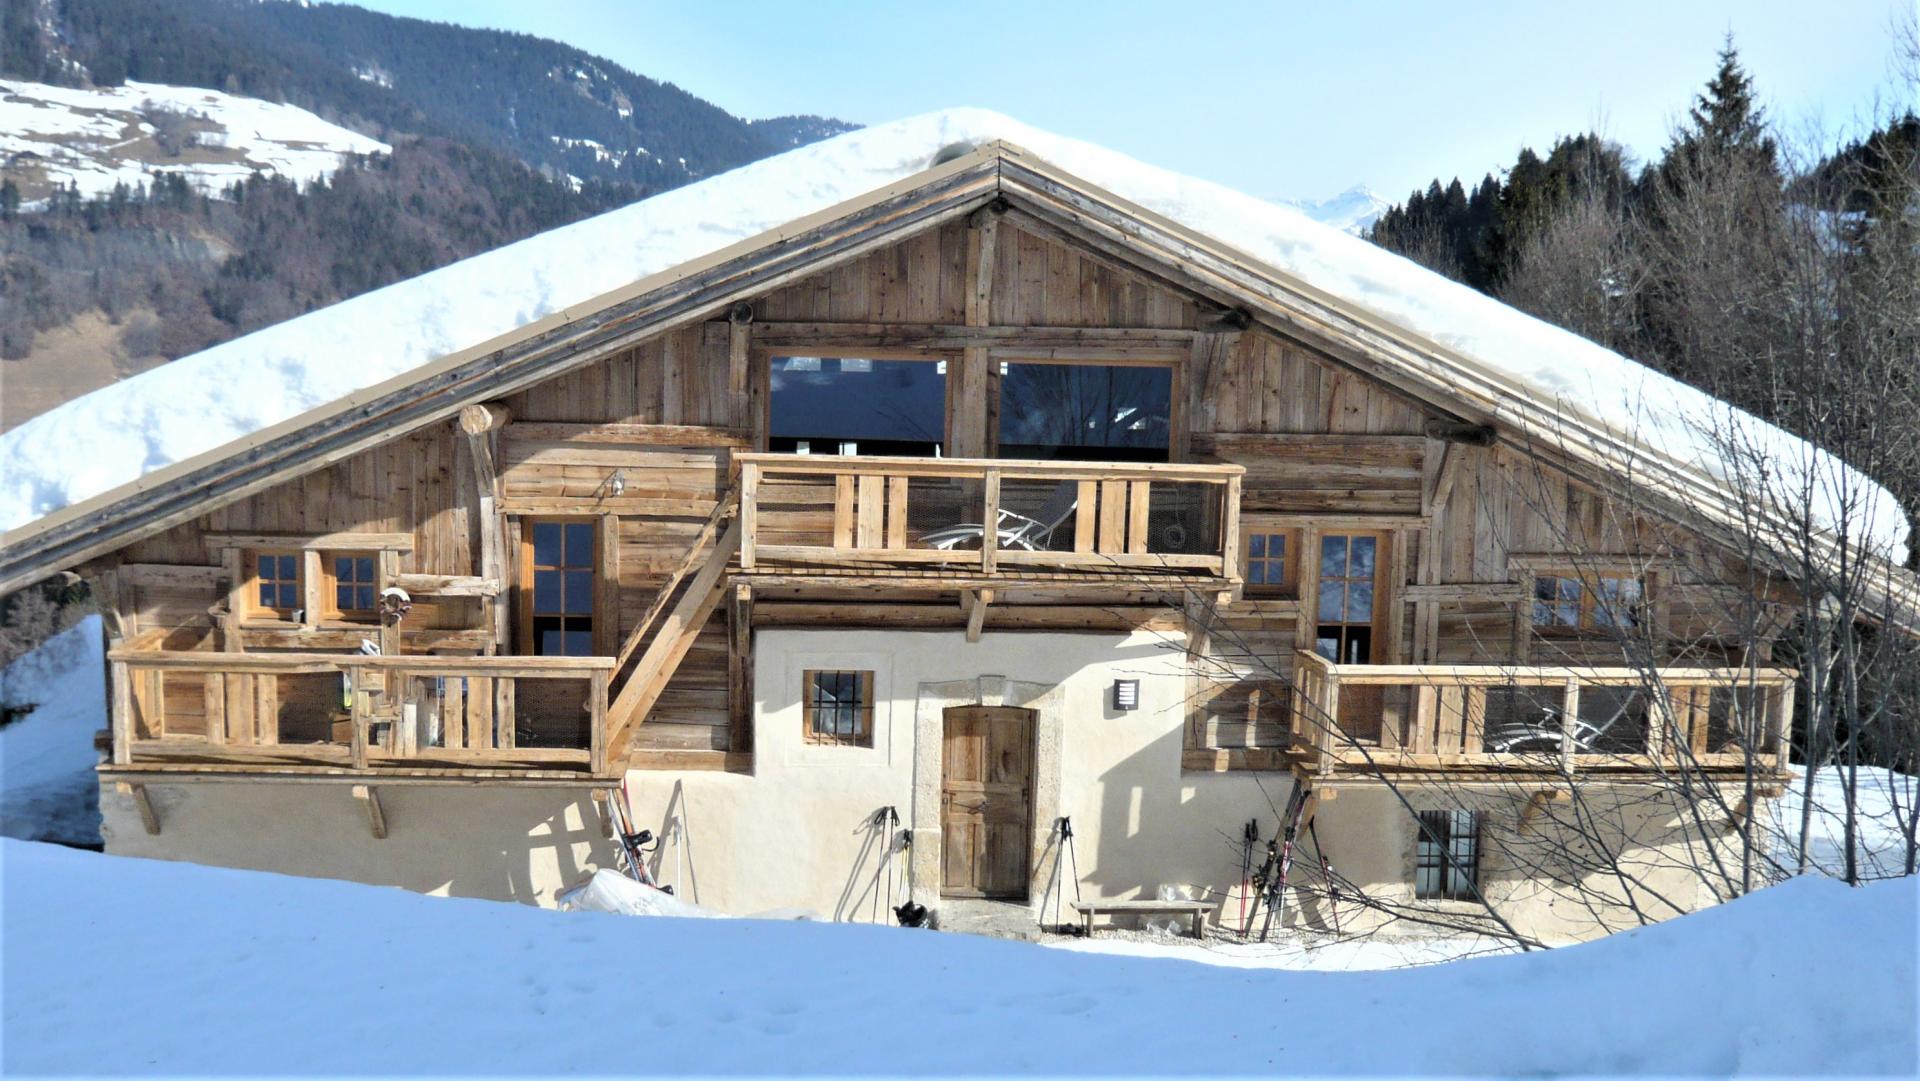 A BEAUTIFUL CHALET TO RENT IN THE ALPS FOR YOUR WINTER HOLIDAYS